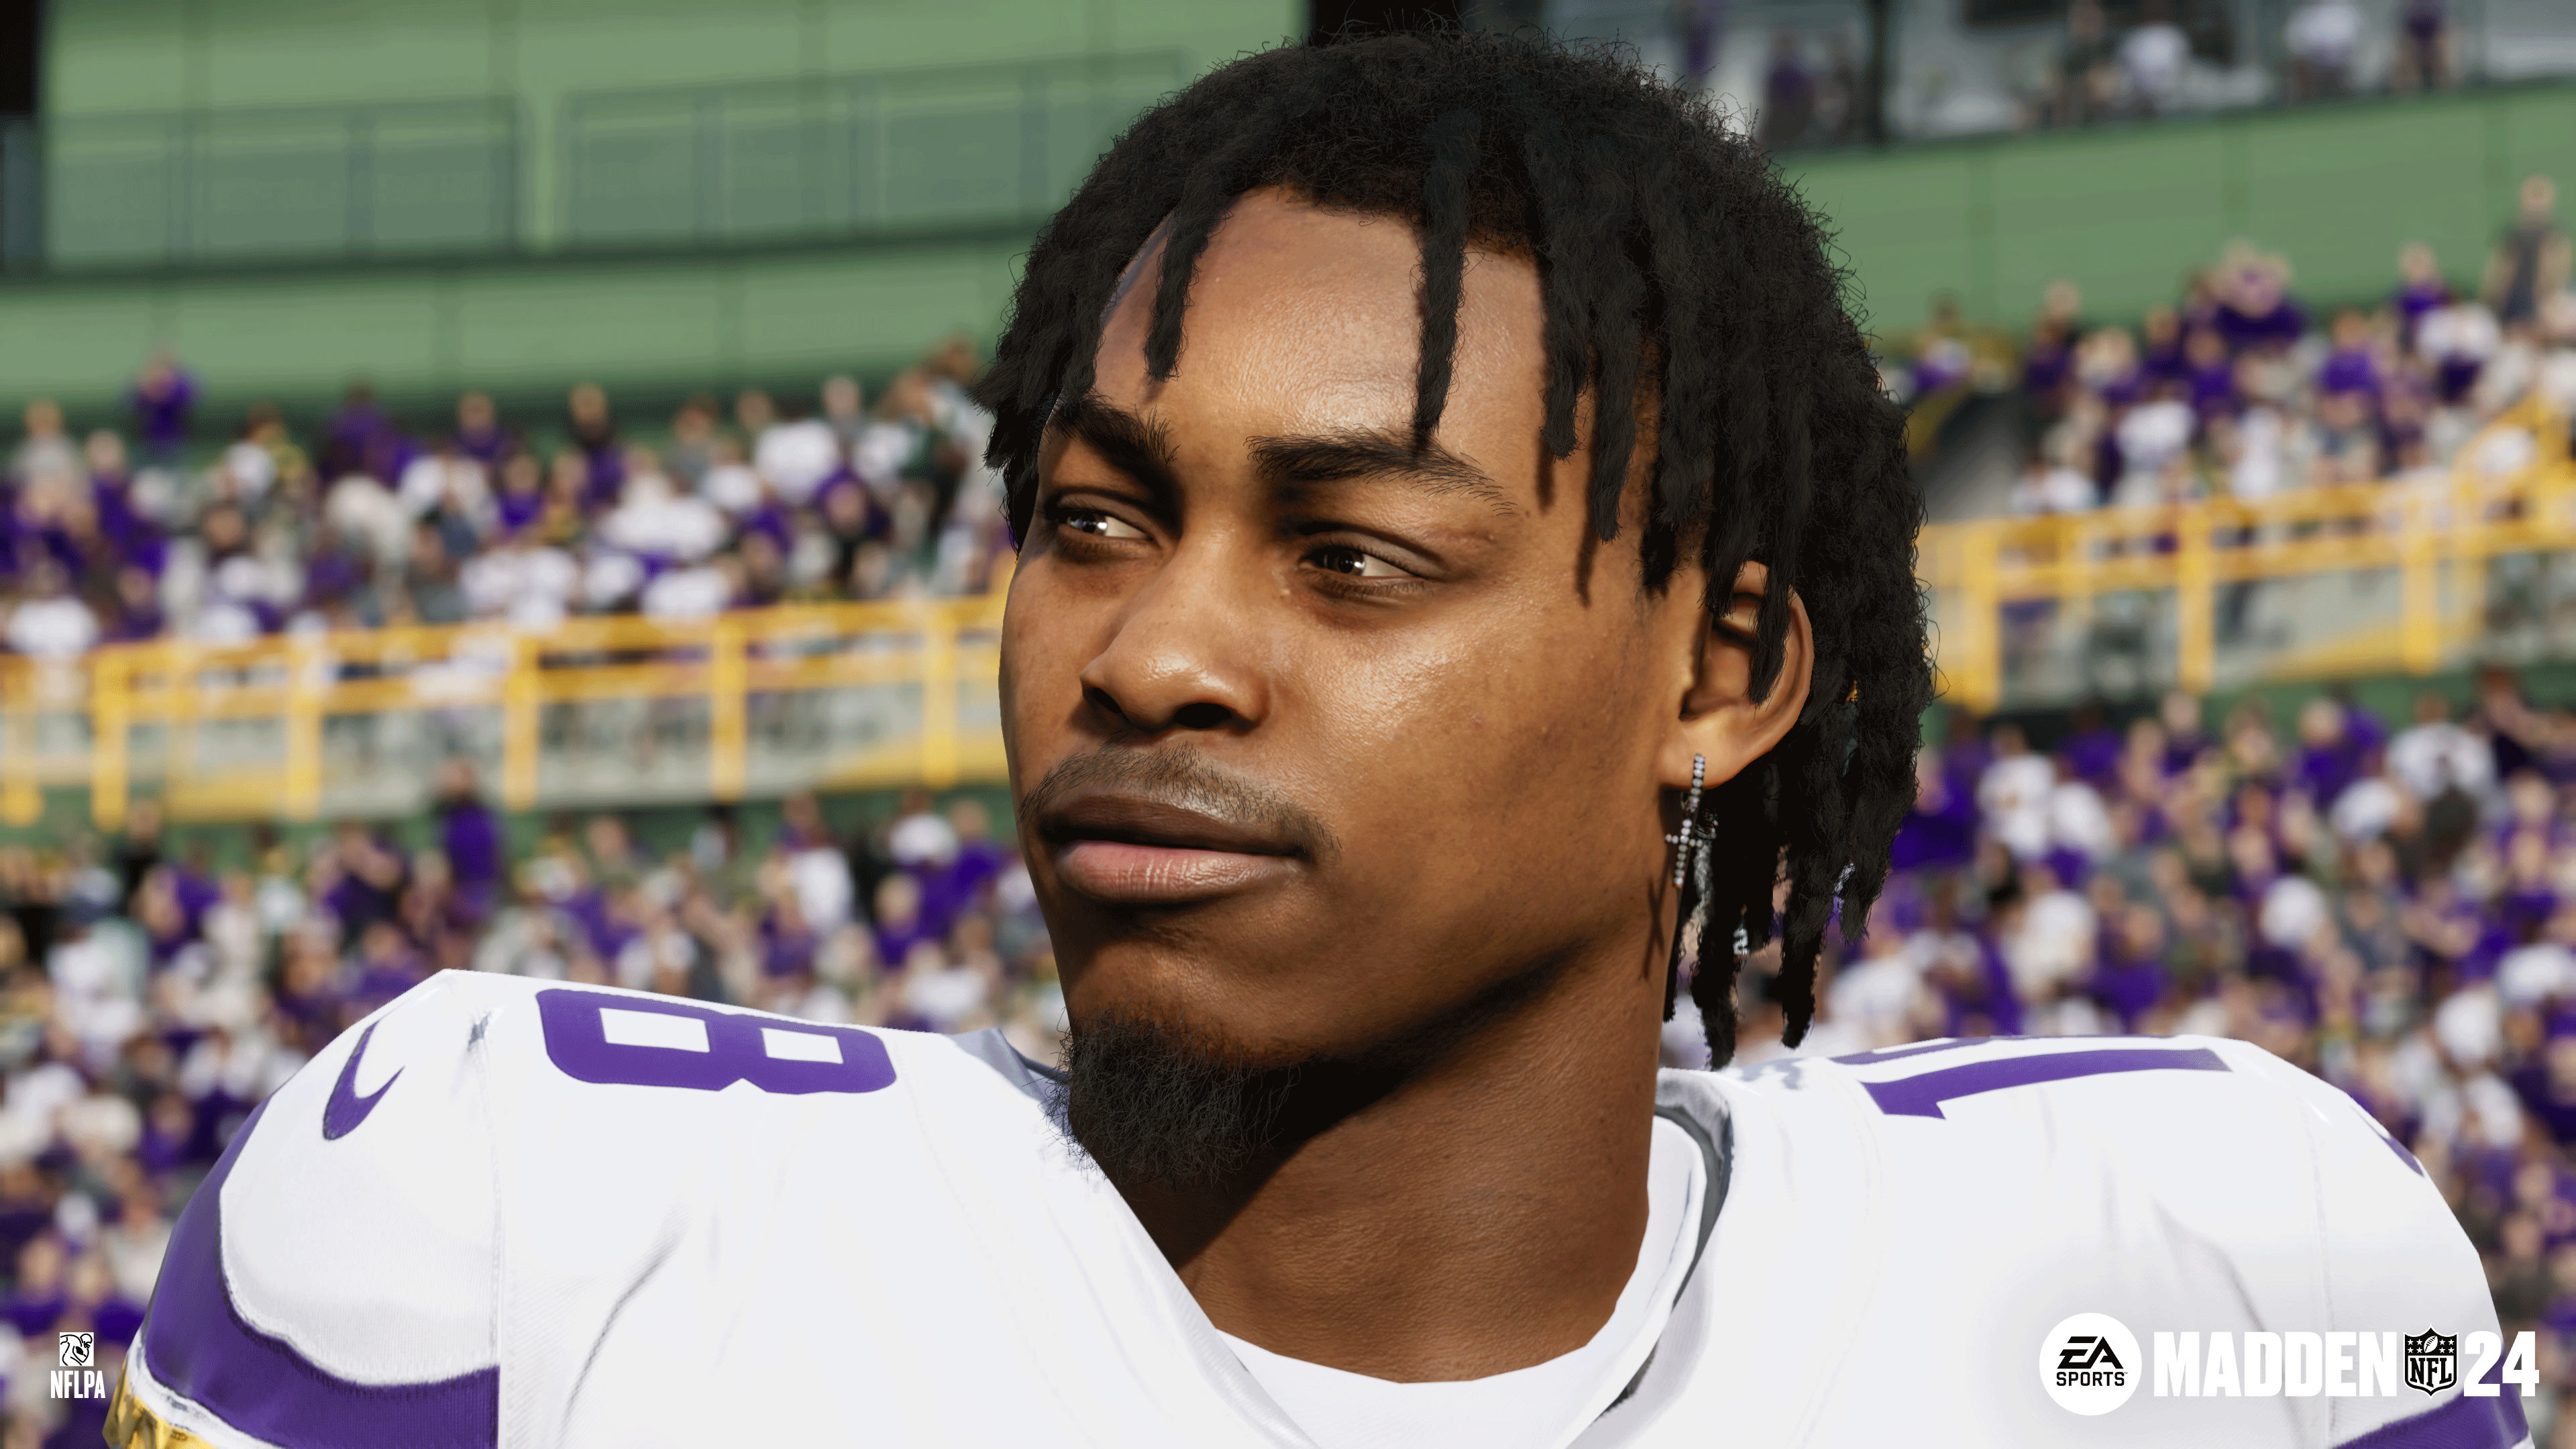 HHW Gaming: Vikings’ WR Justin Jefferson First Member of ‘Madden NFL 24’s 99 Rating Club